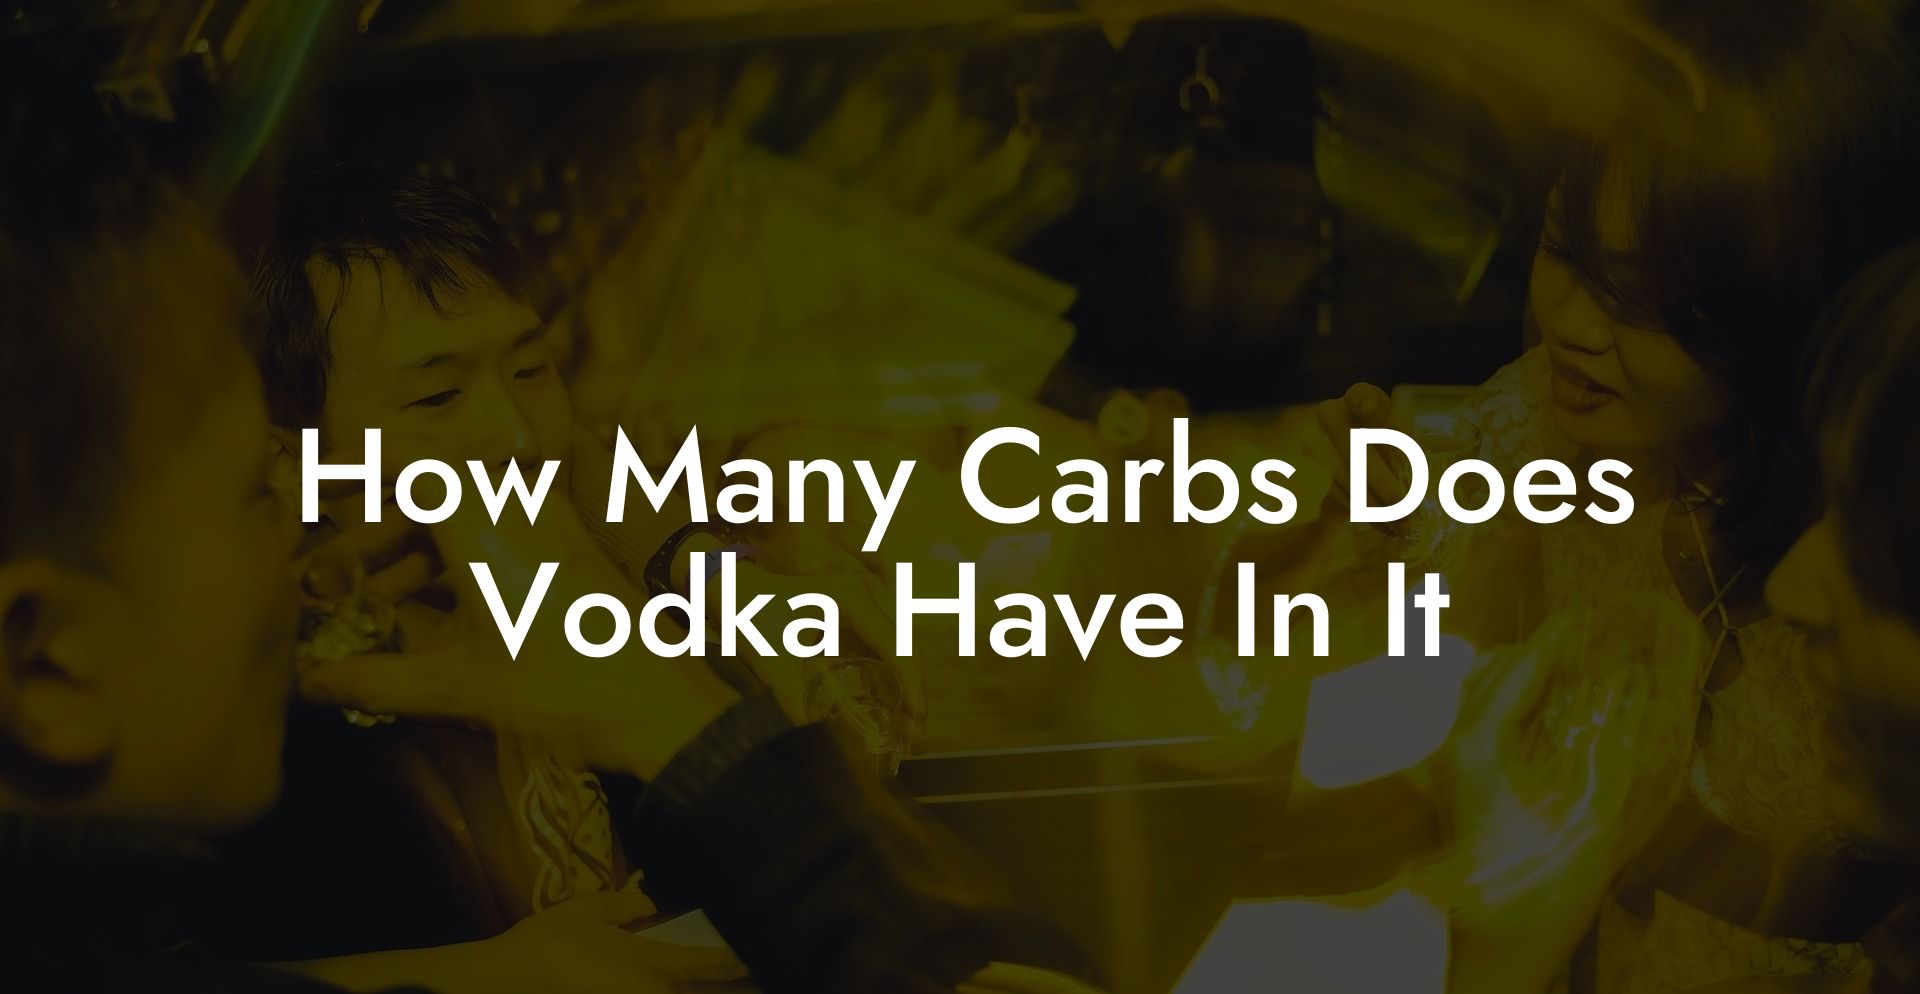 How Many Carbs Does Vodka Have In It